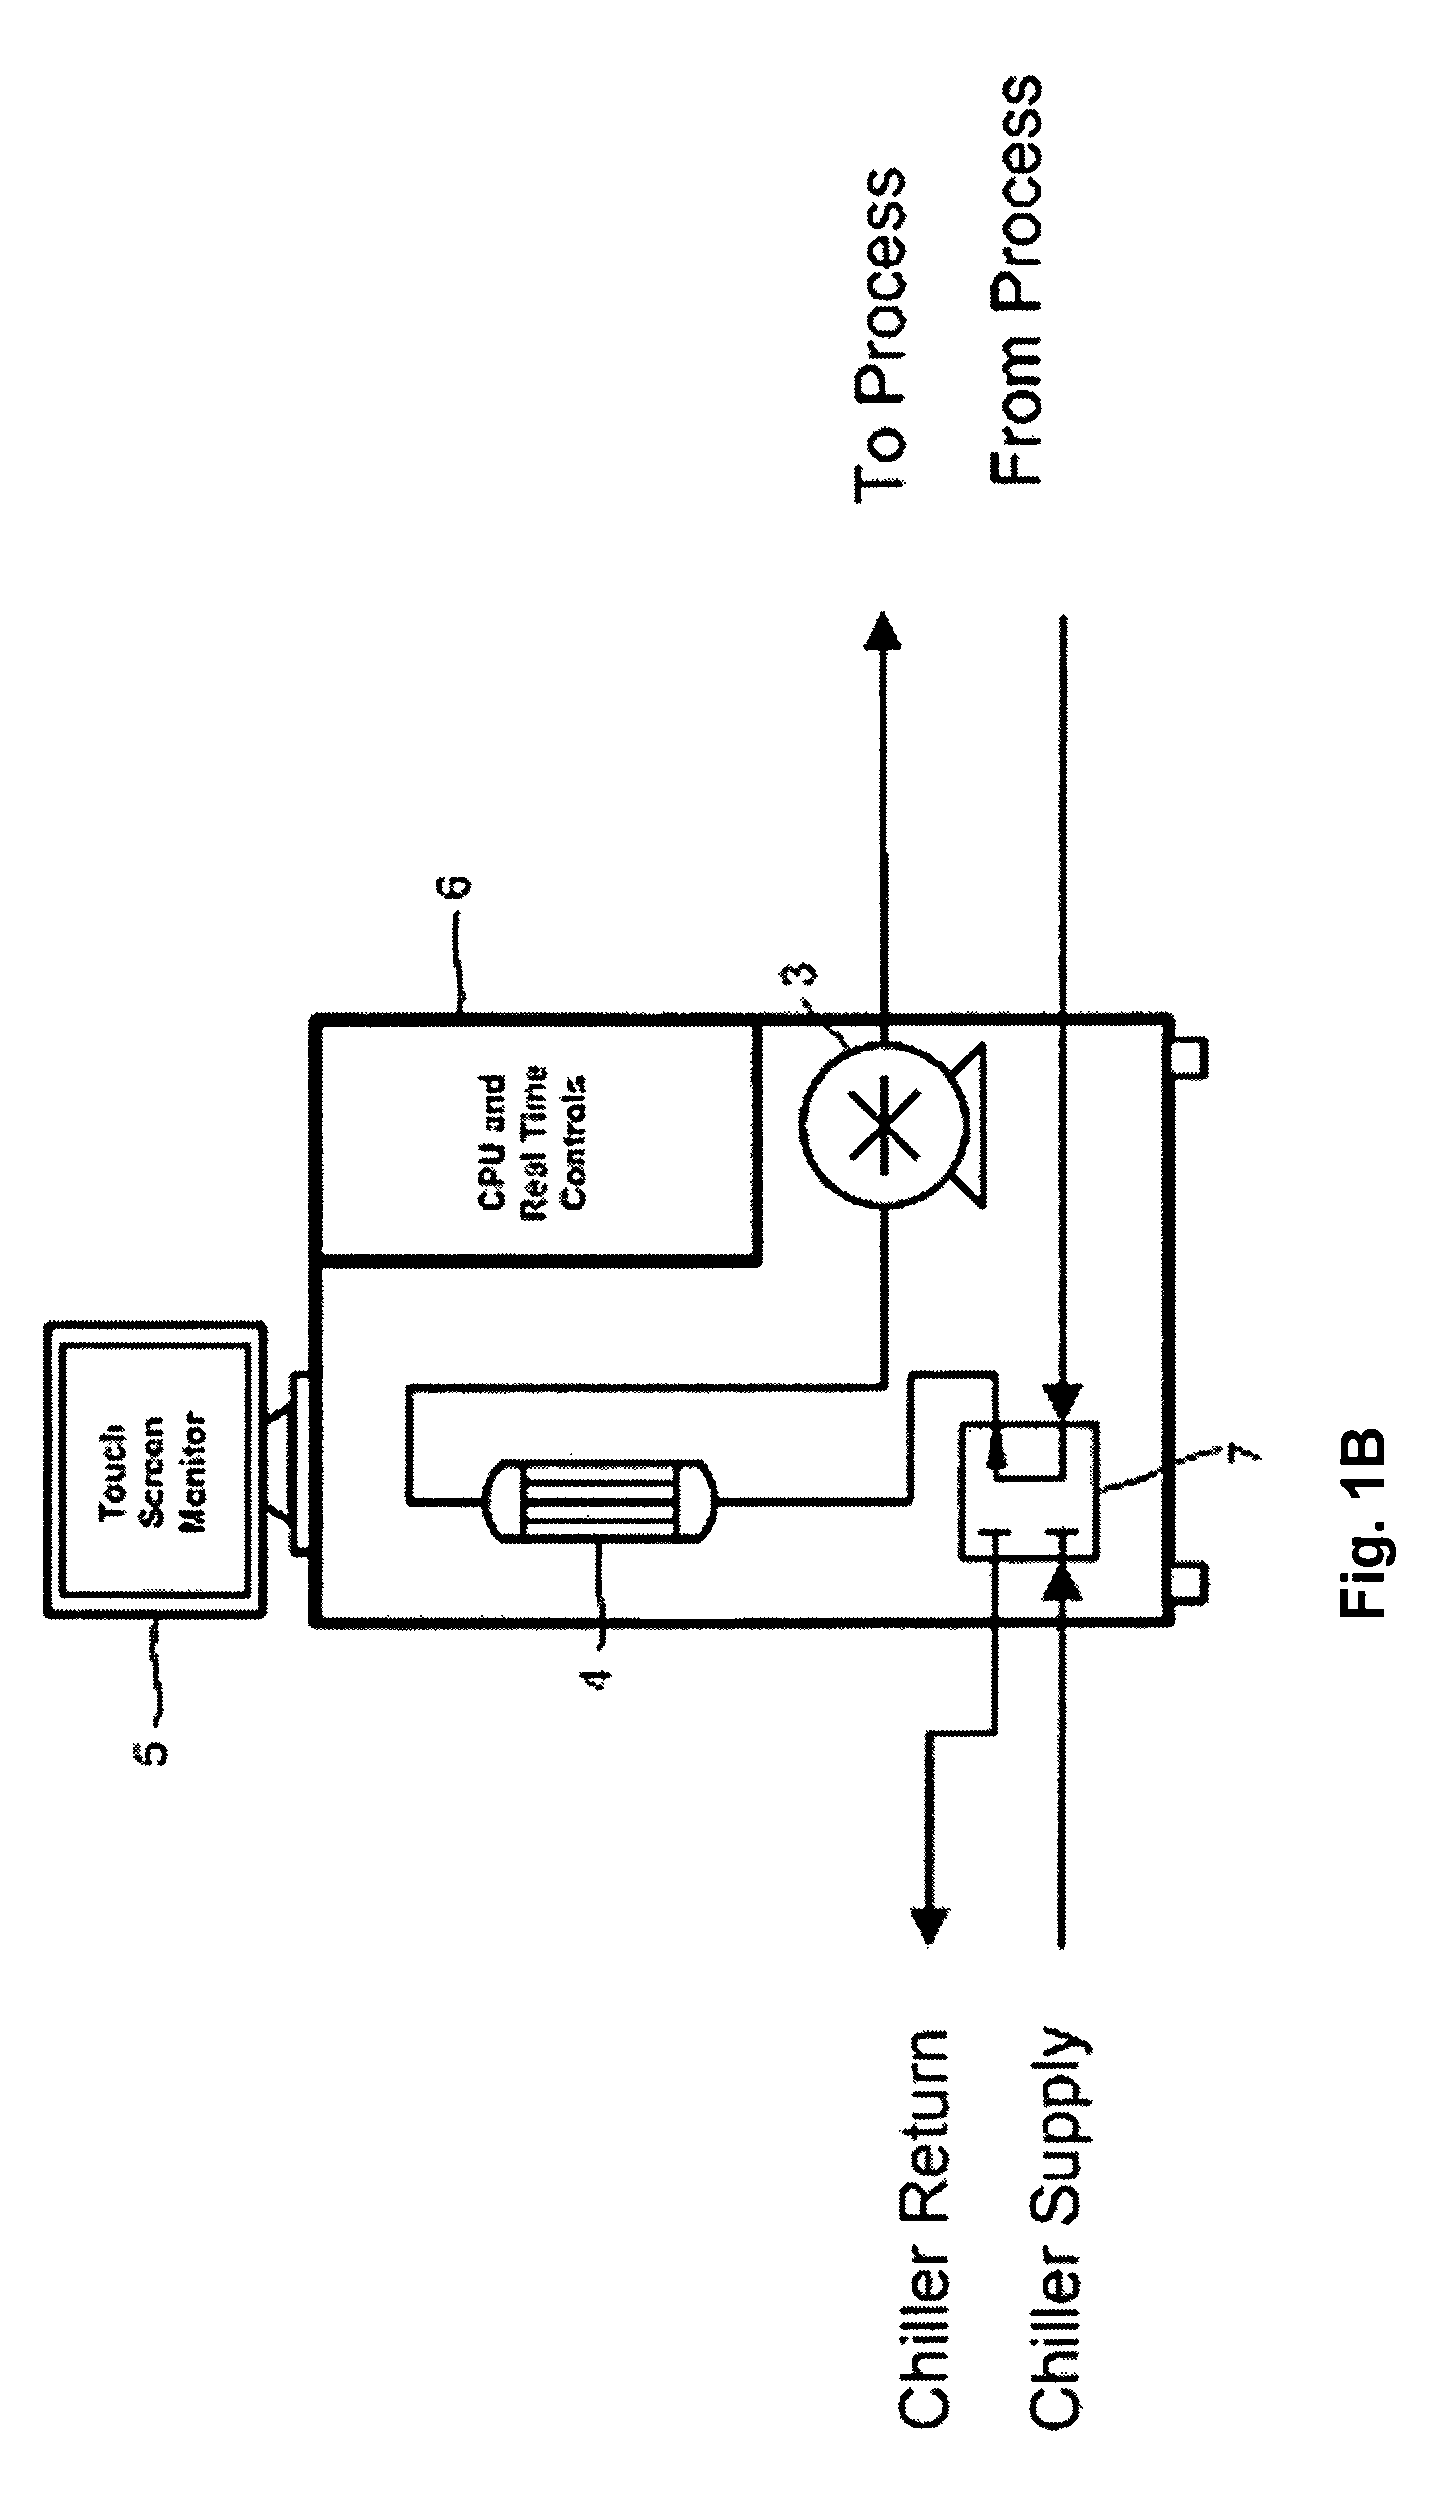 Method and apparatus for thermally controlling a mold, die, or injection barrel